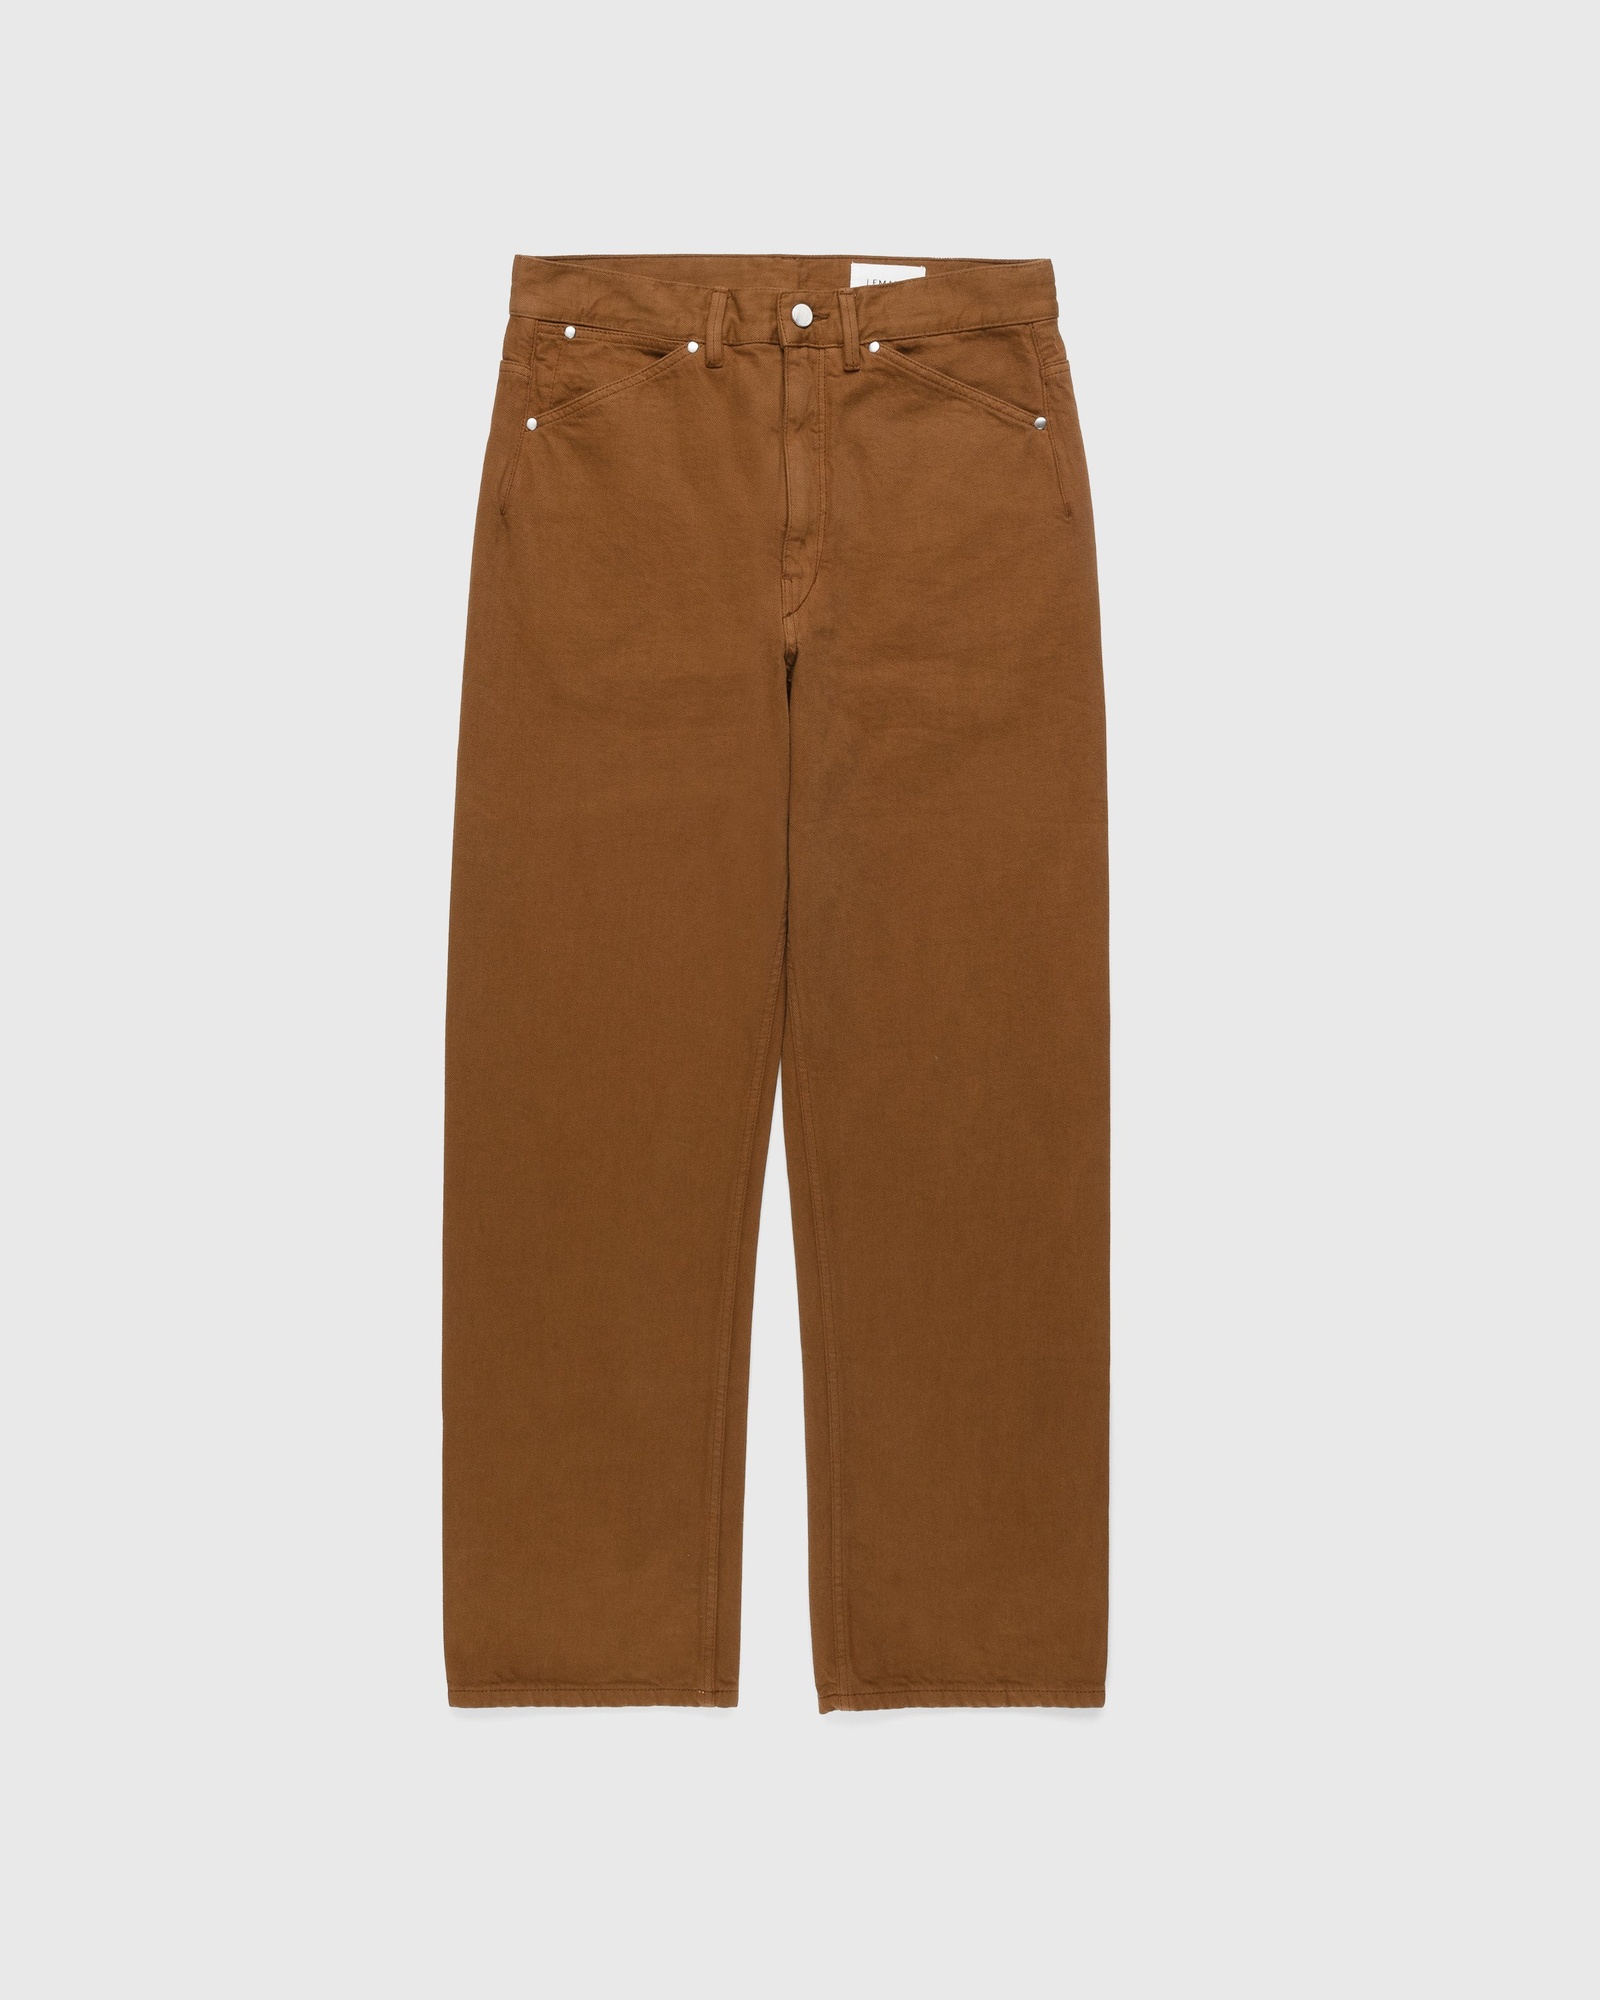 Lemaire – Seamless Jeans Brown | Highsnobiety Shop